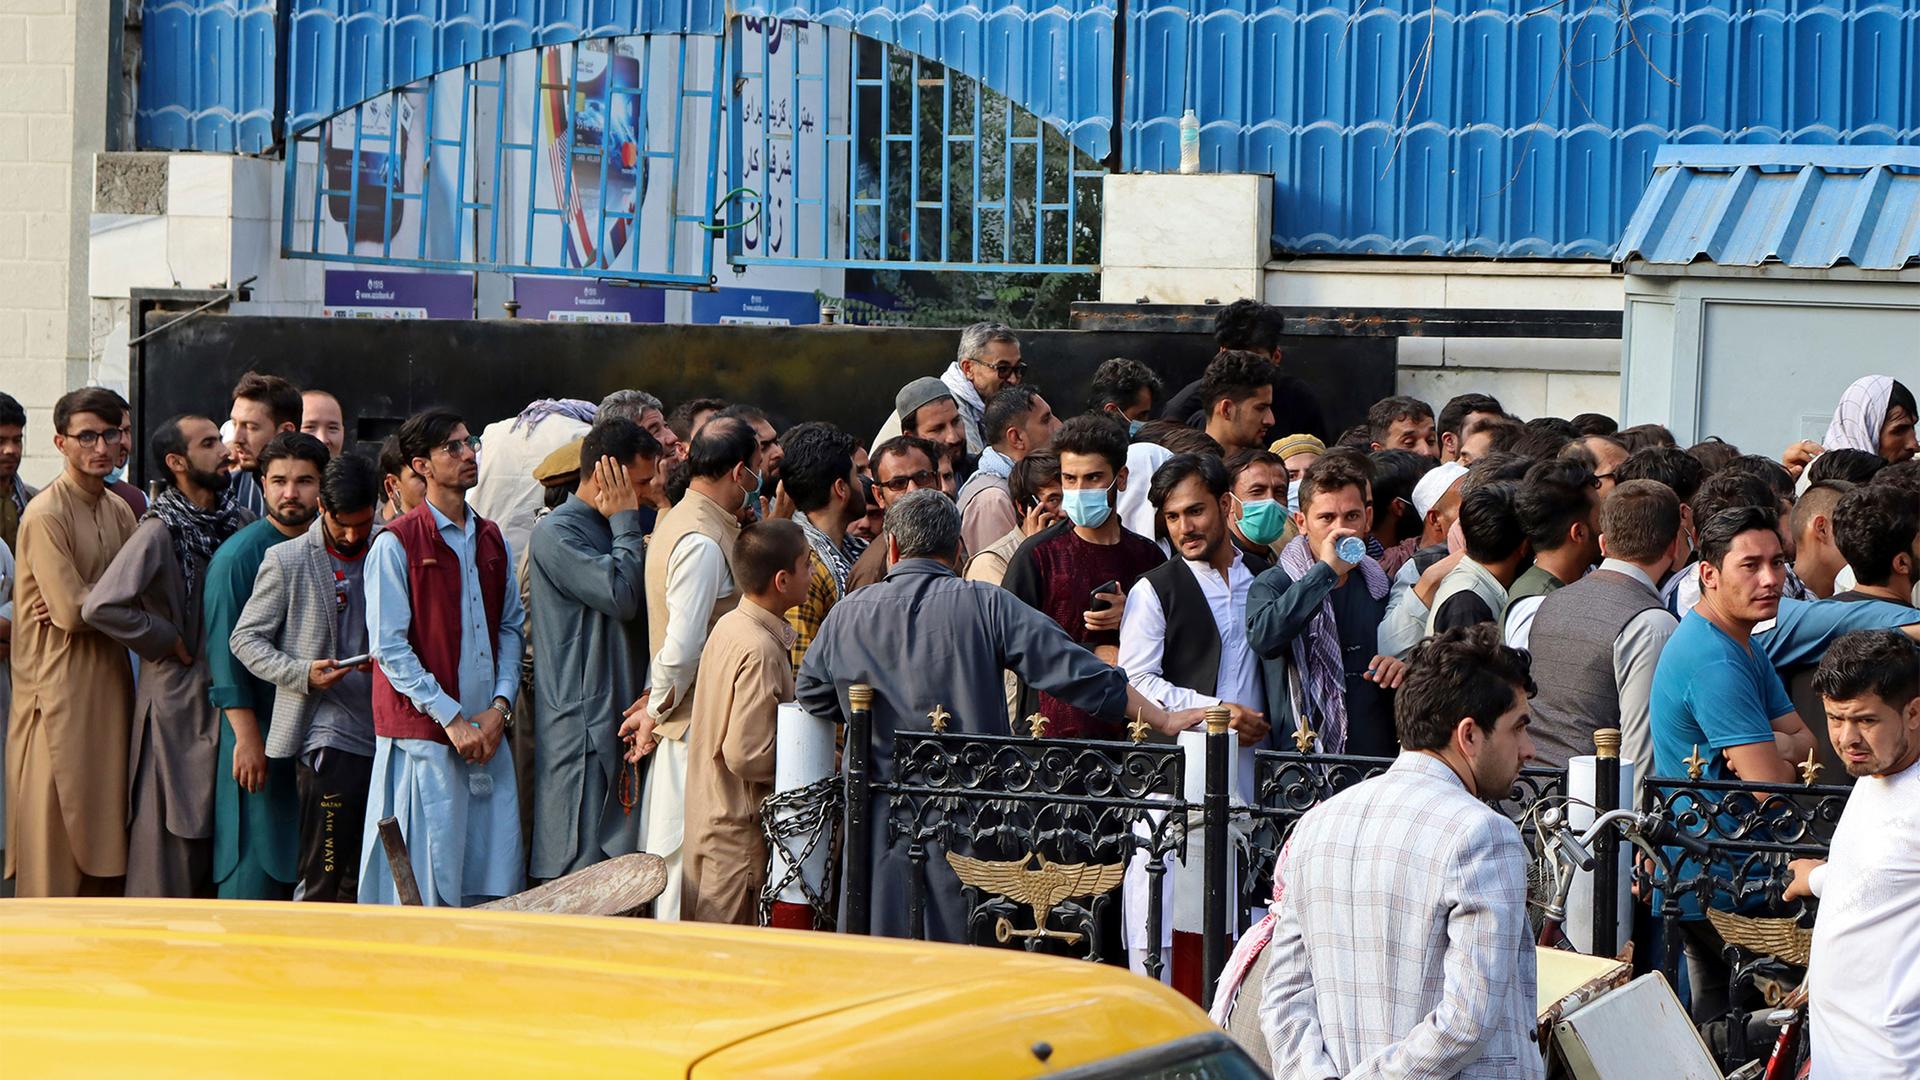 Afghans wait in long lines for hours to try to withdraw money, in front of a Bank in Kabul, Afghanistan